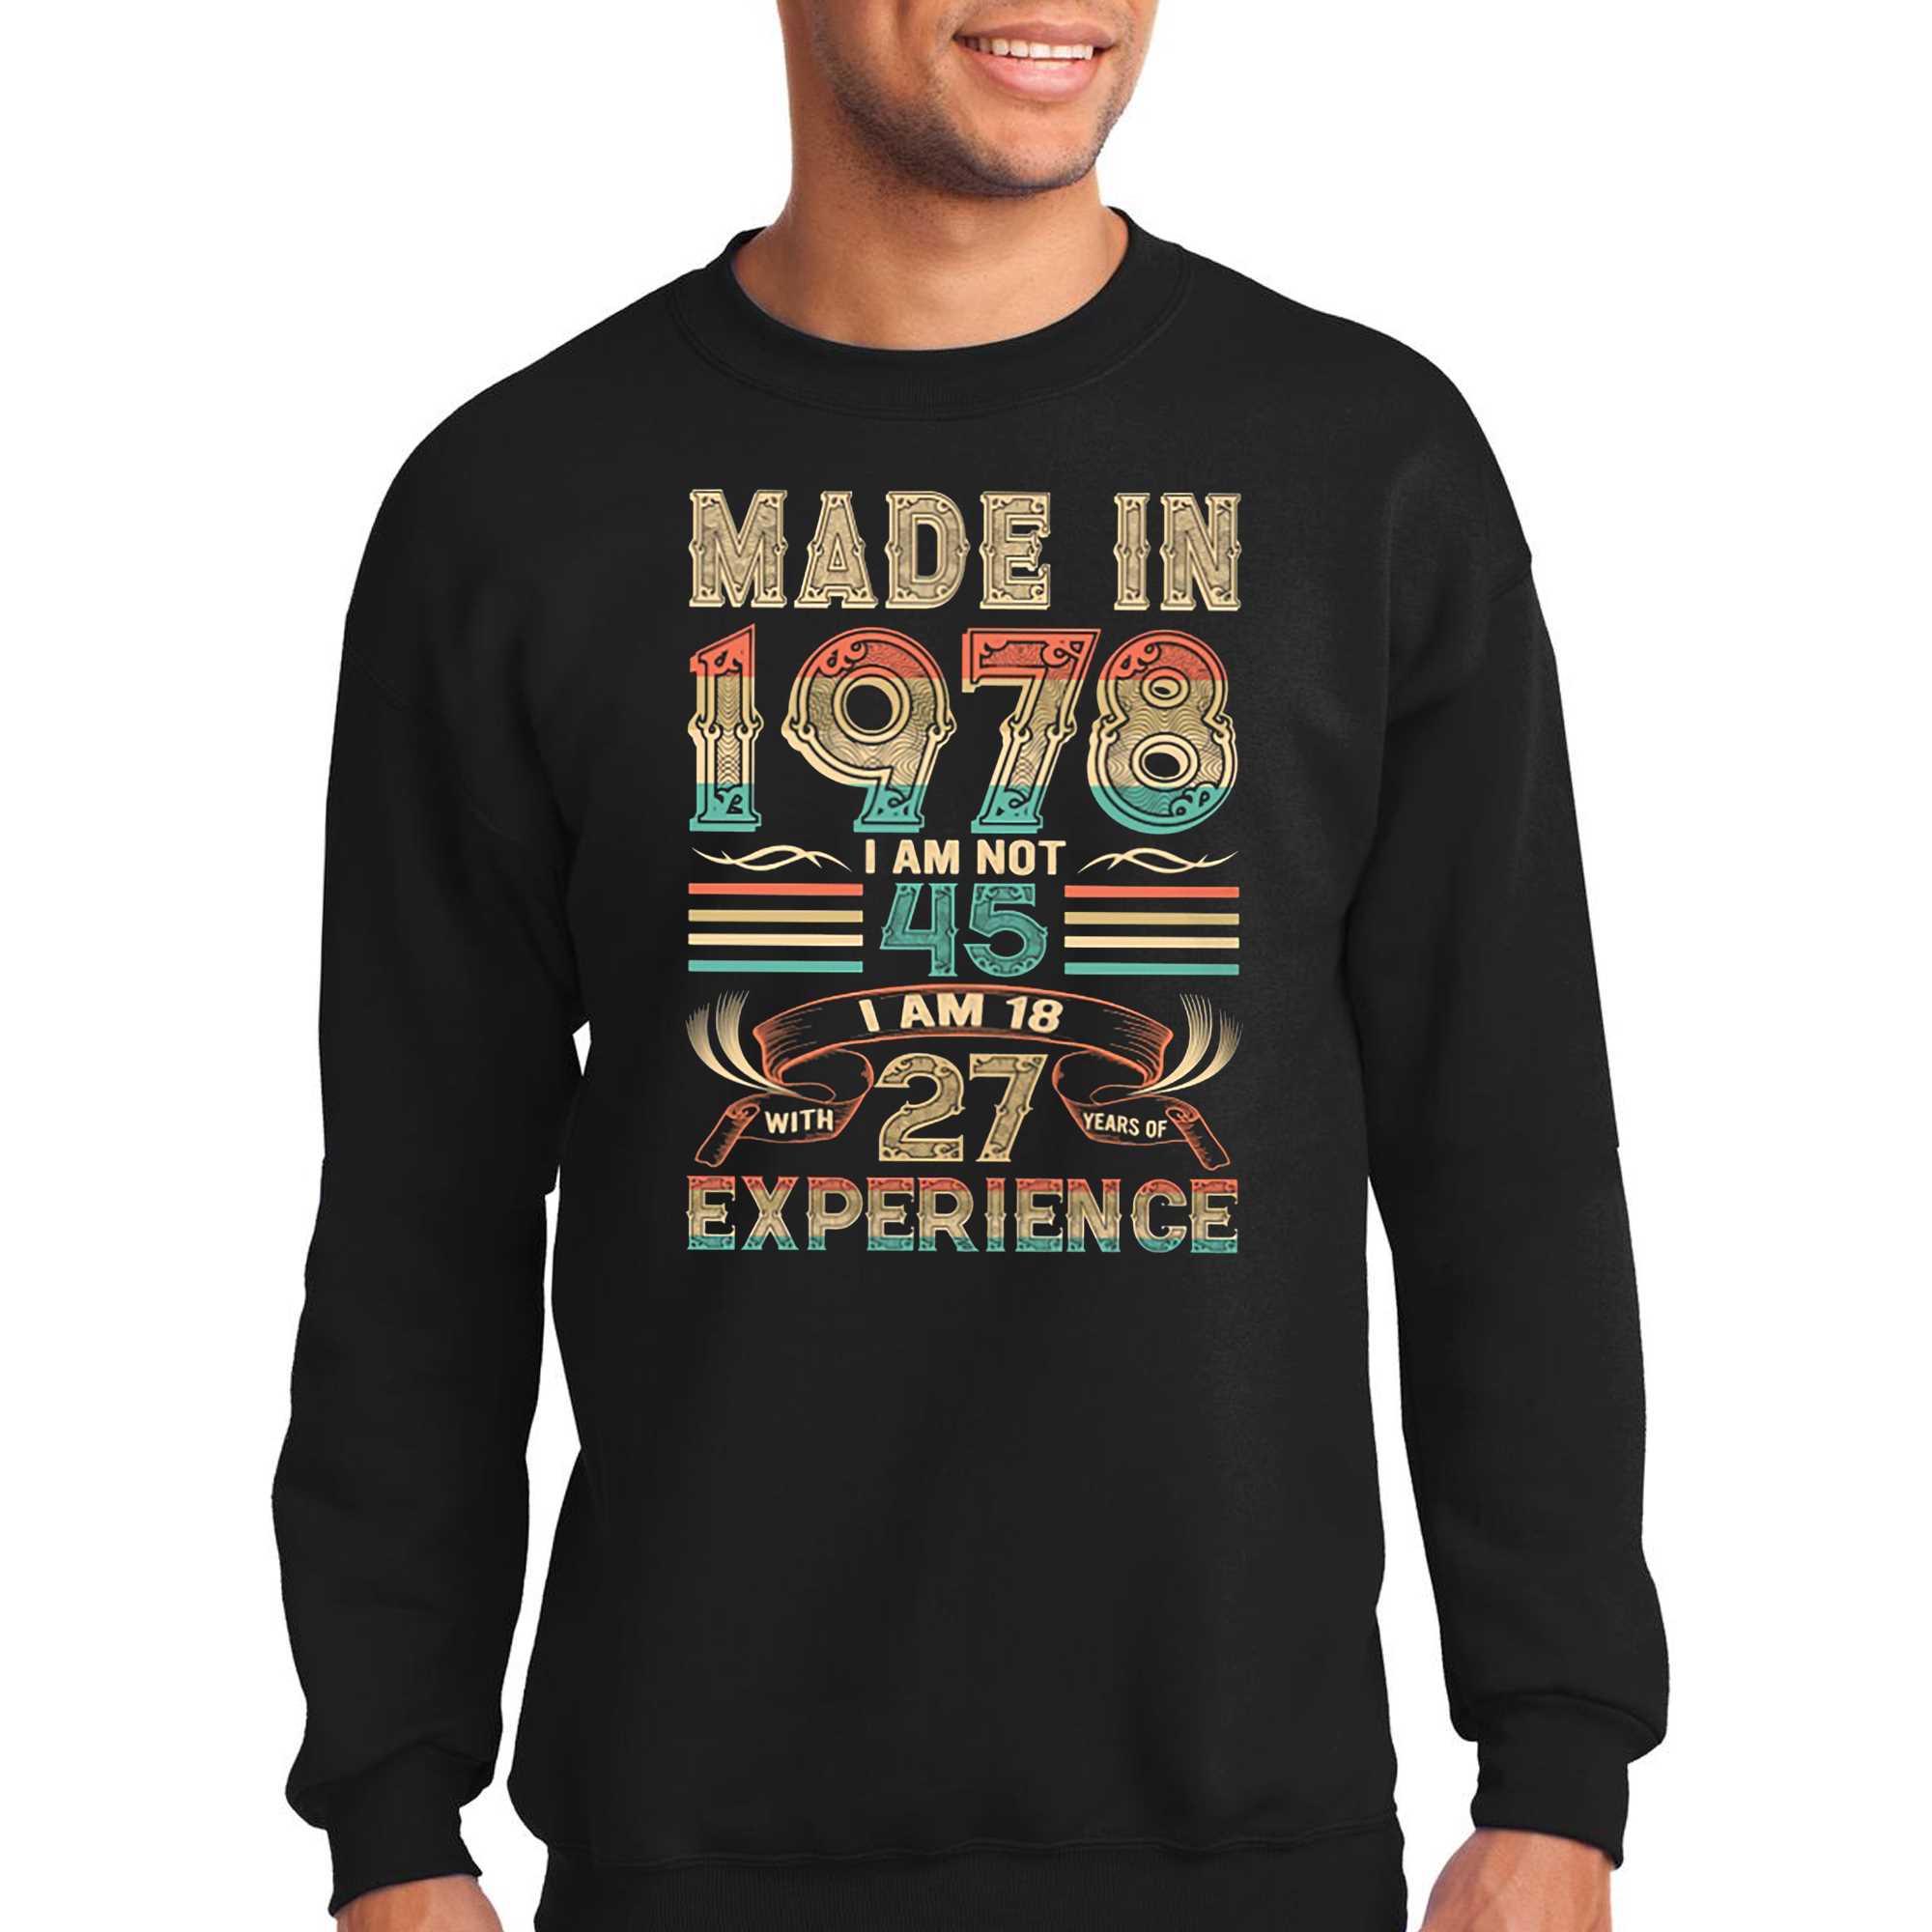 Made In 1978 I Am Not 45 I Am 18 With 27 Years Of Experience Shirt 